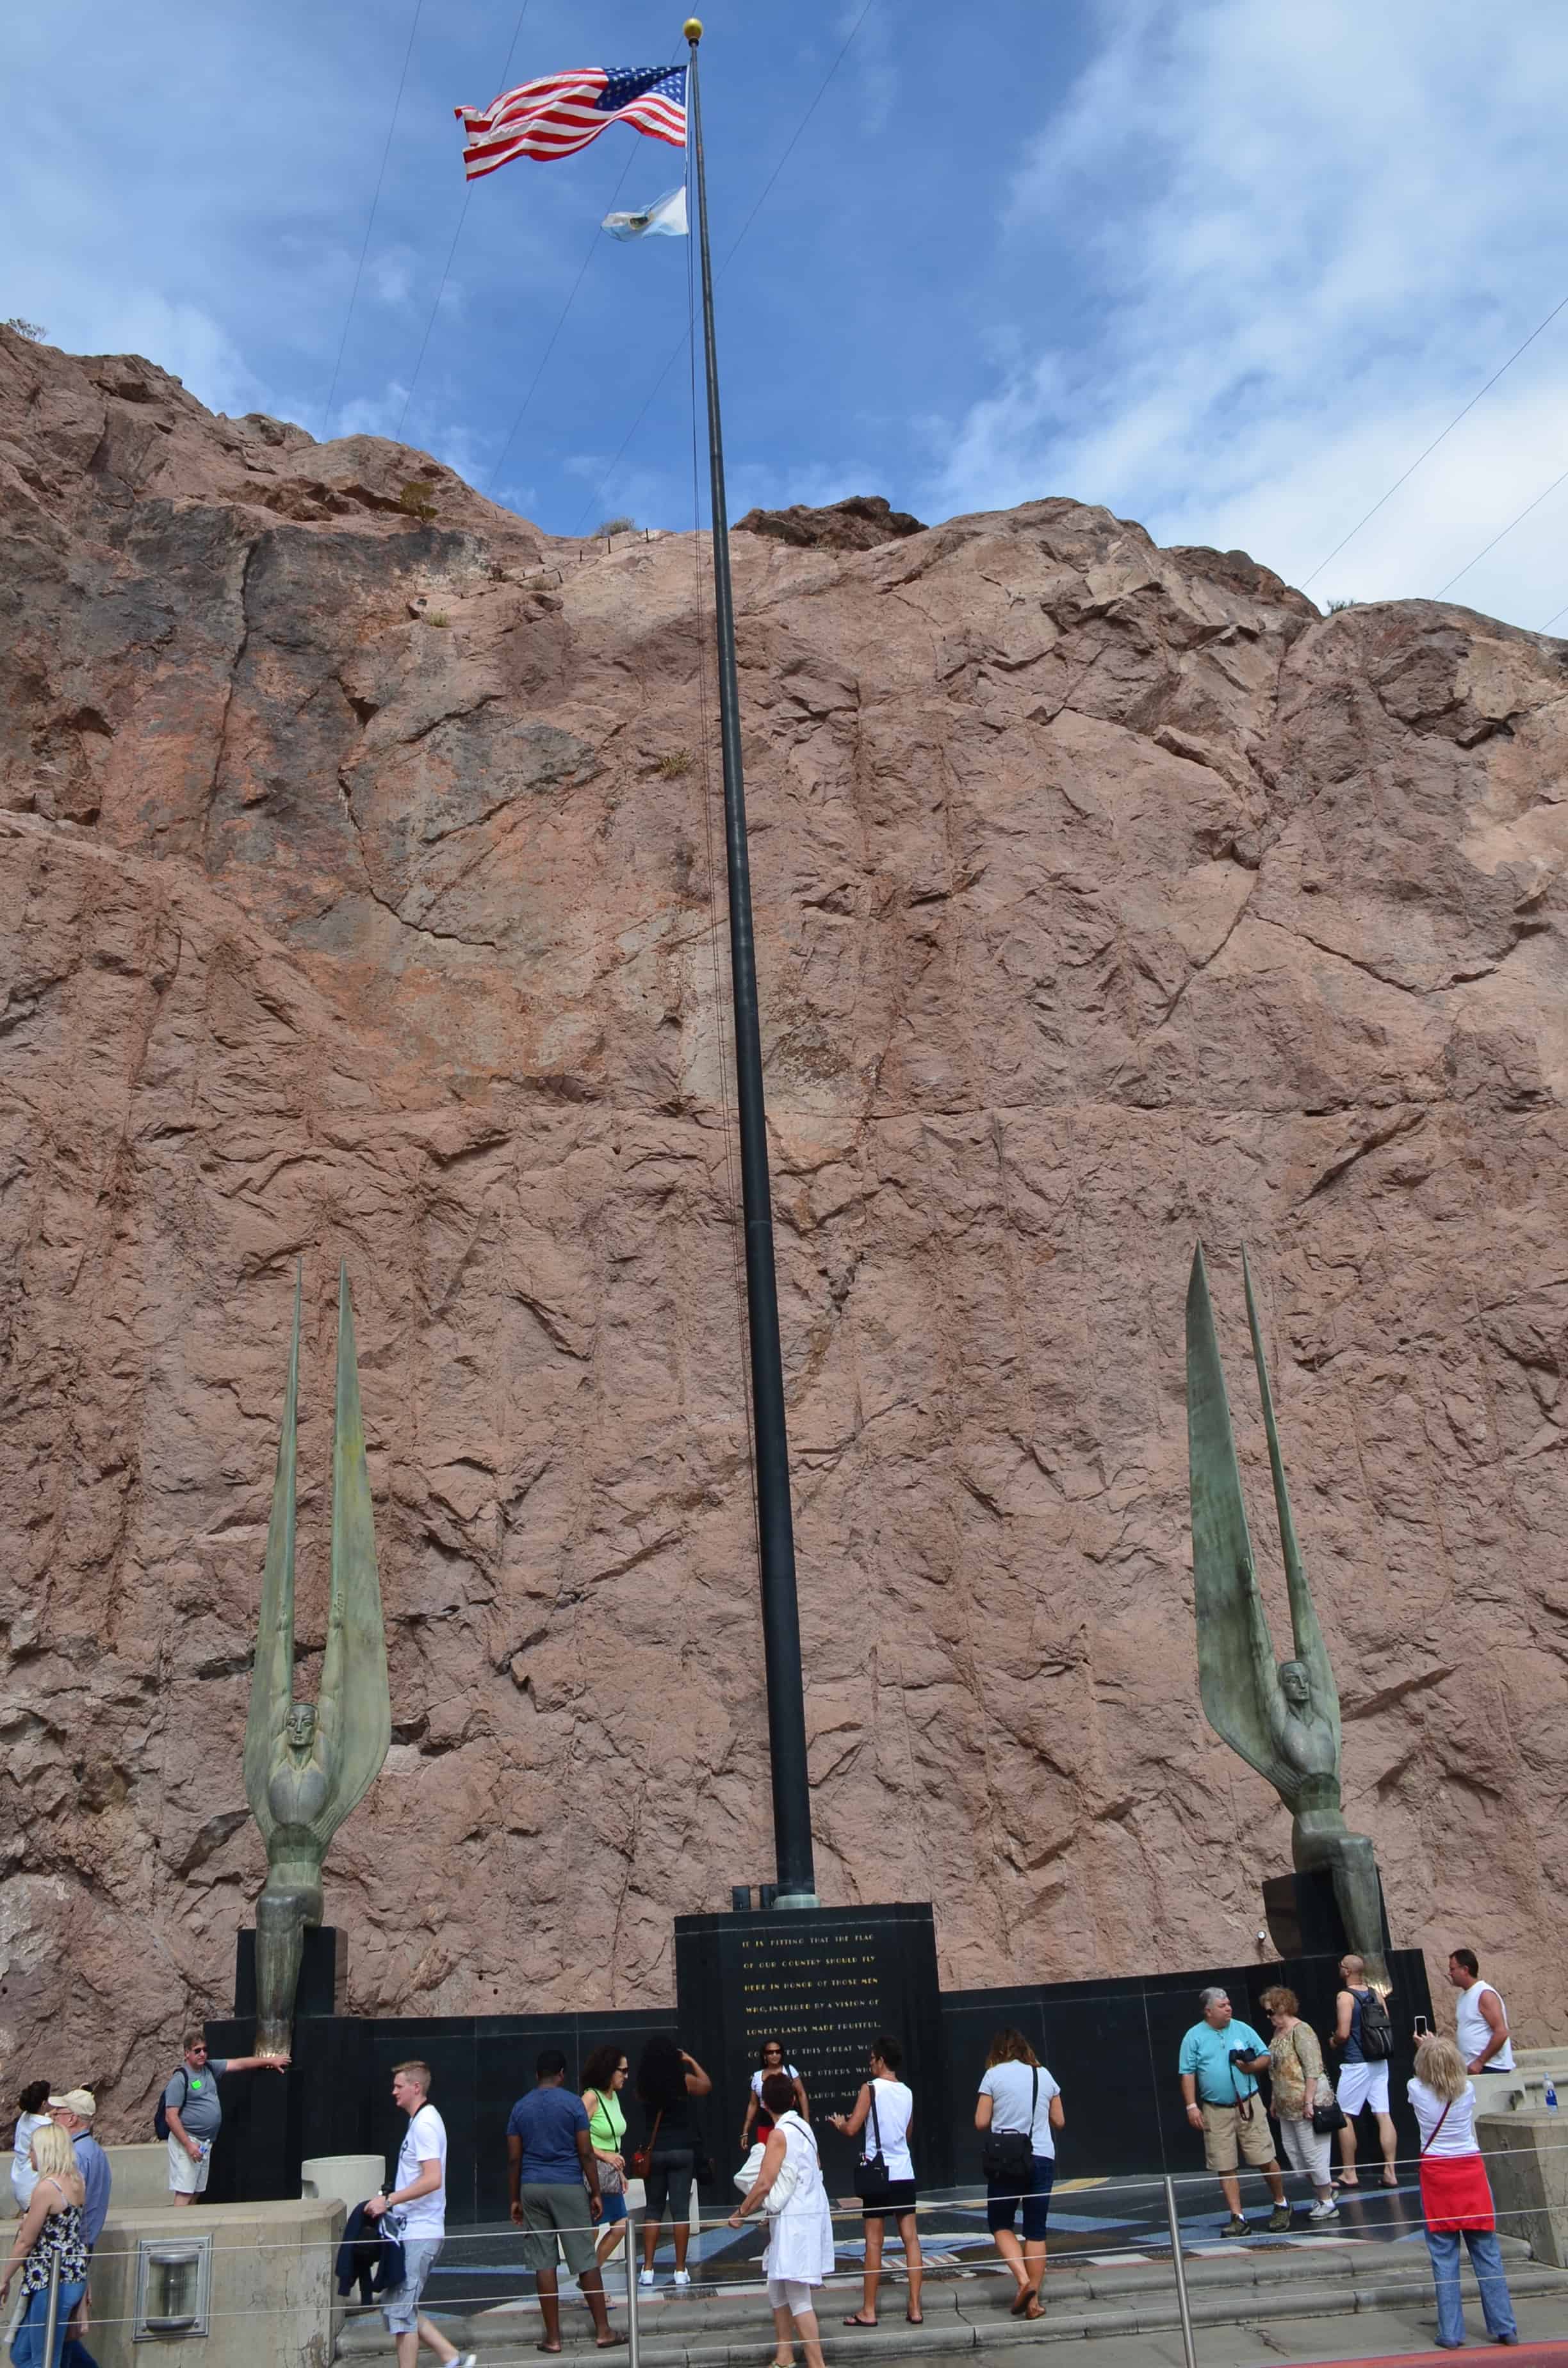 Winged Figures of the Republic monument at Hoover Dam in Nevada